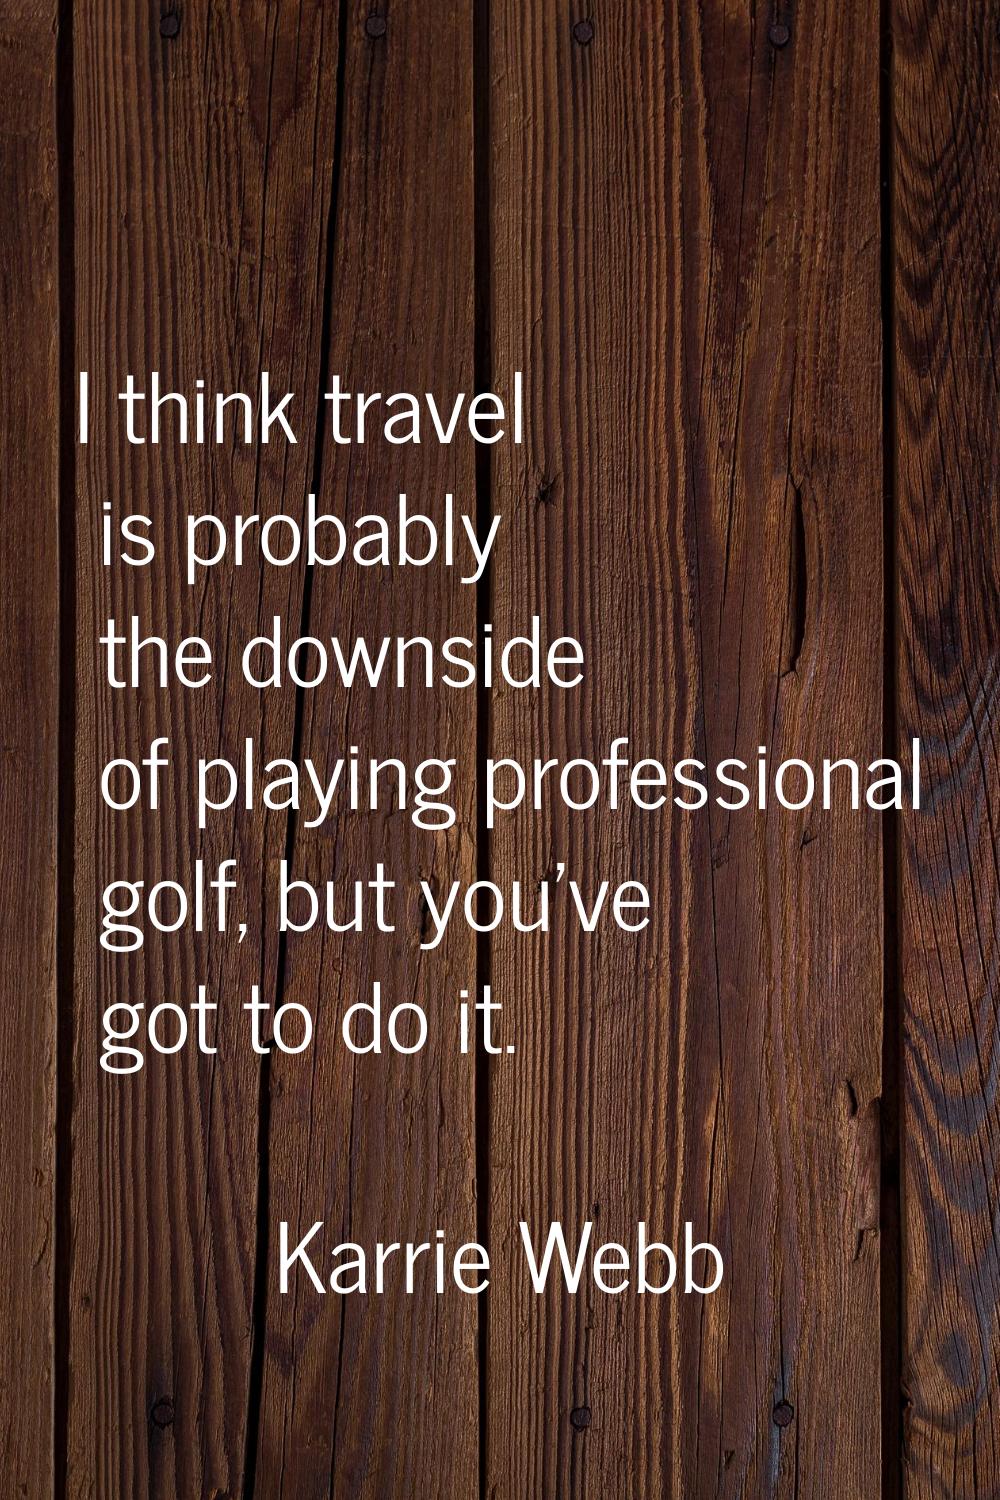 I think travel is probably the downside of playing professional golf, but you've got to do it.